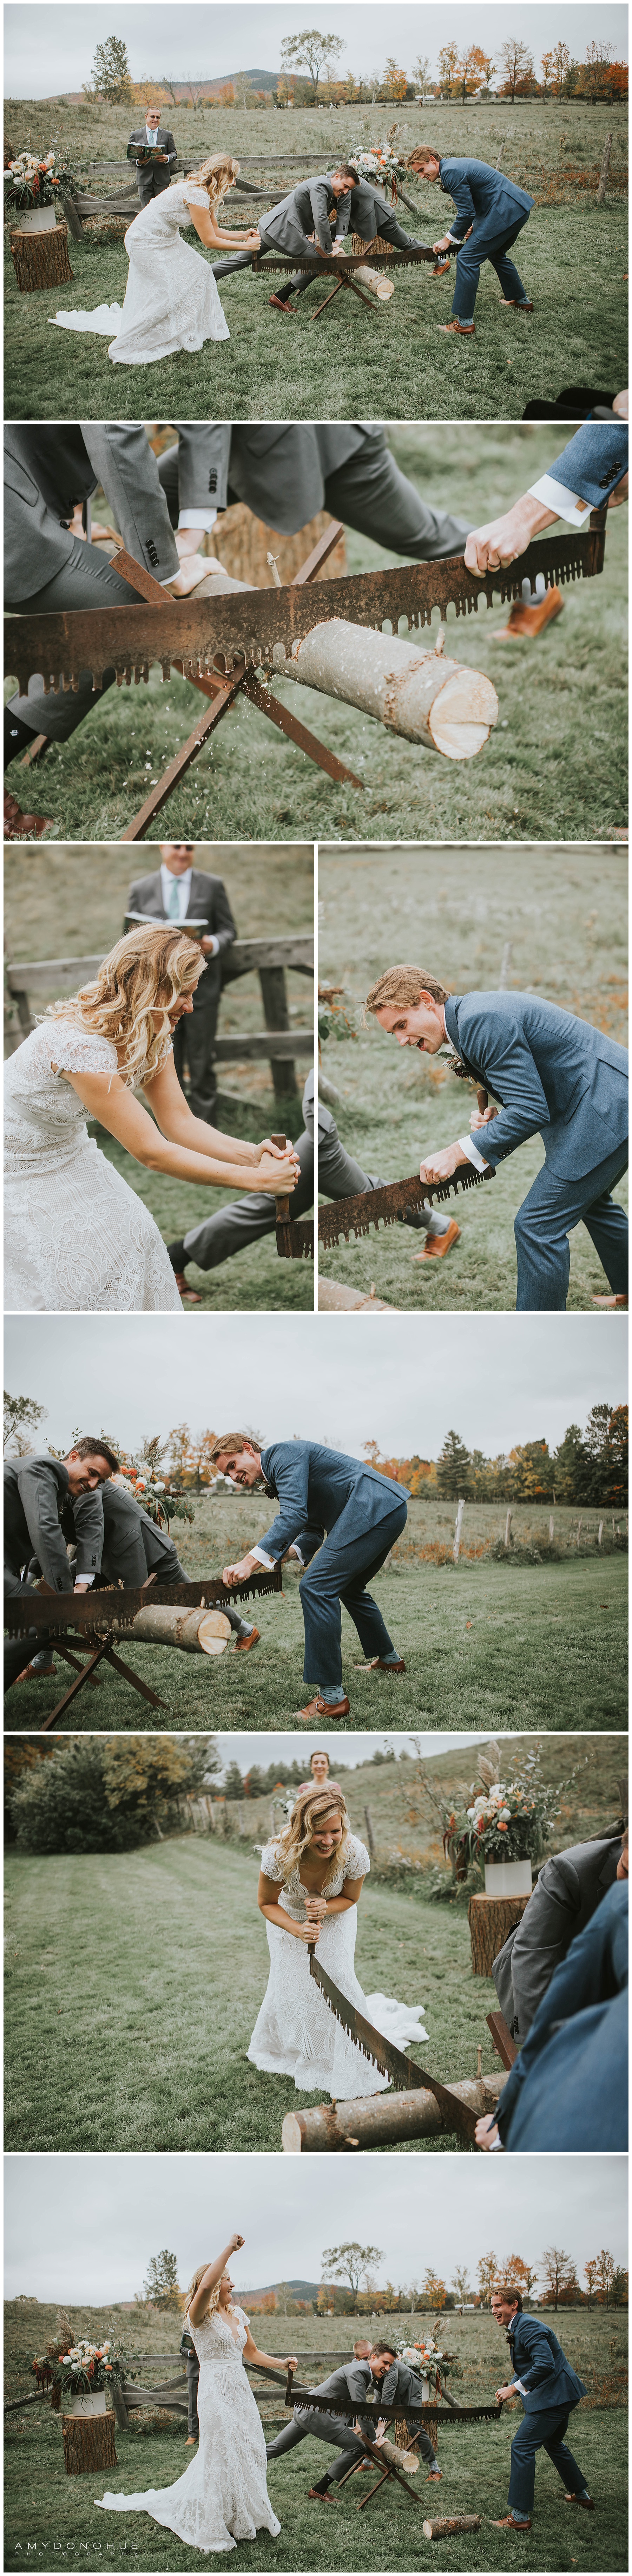 German Wedding Log Sawing Tradition | The Inn at Round Barn Farm | © Amy Donohue Photography